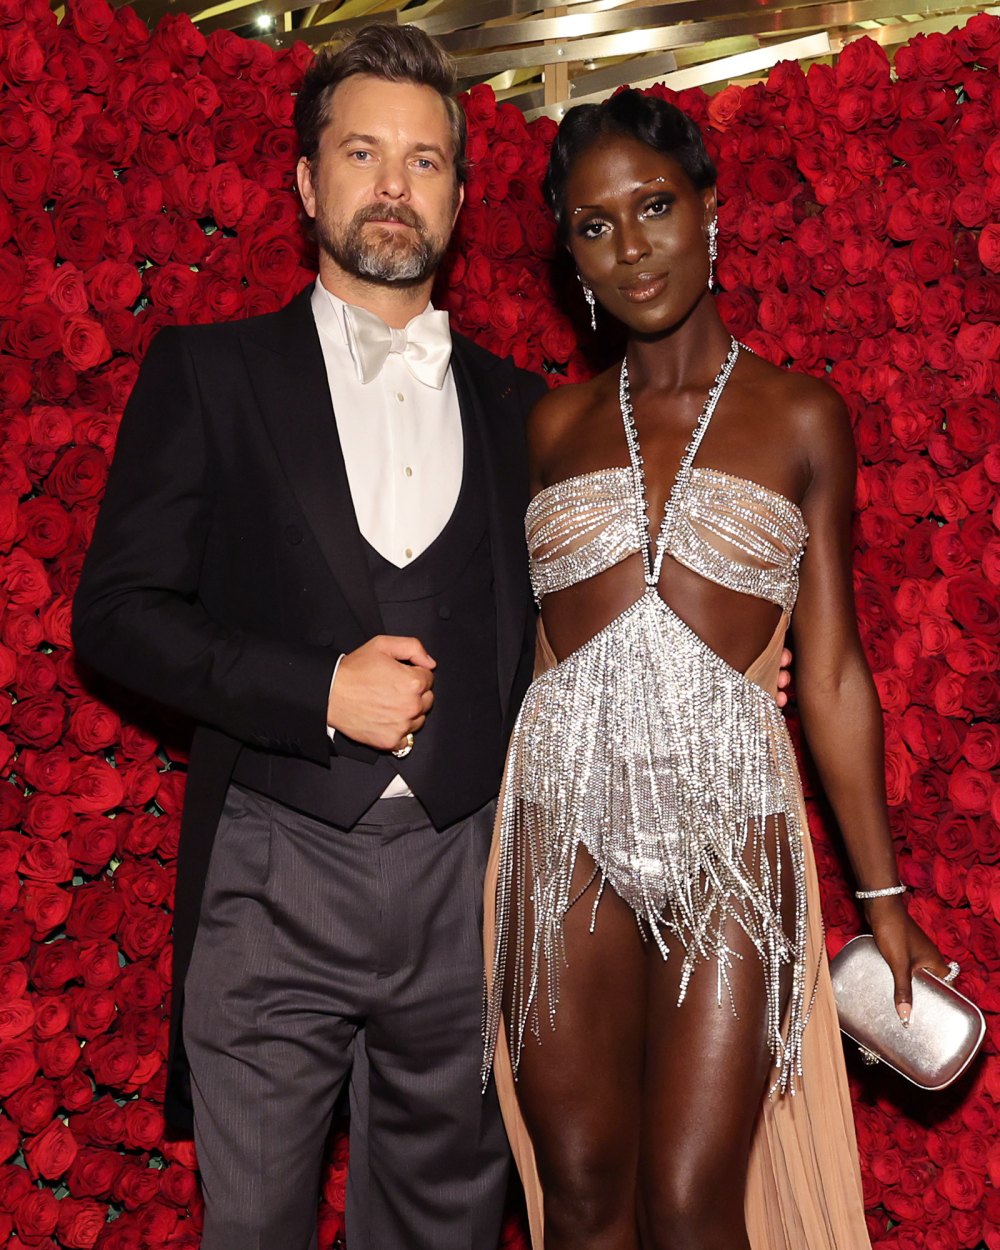 Jodie Turner-Smith Reflects on Different Love Languages After Joshua Jackson Split